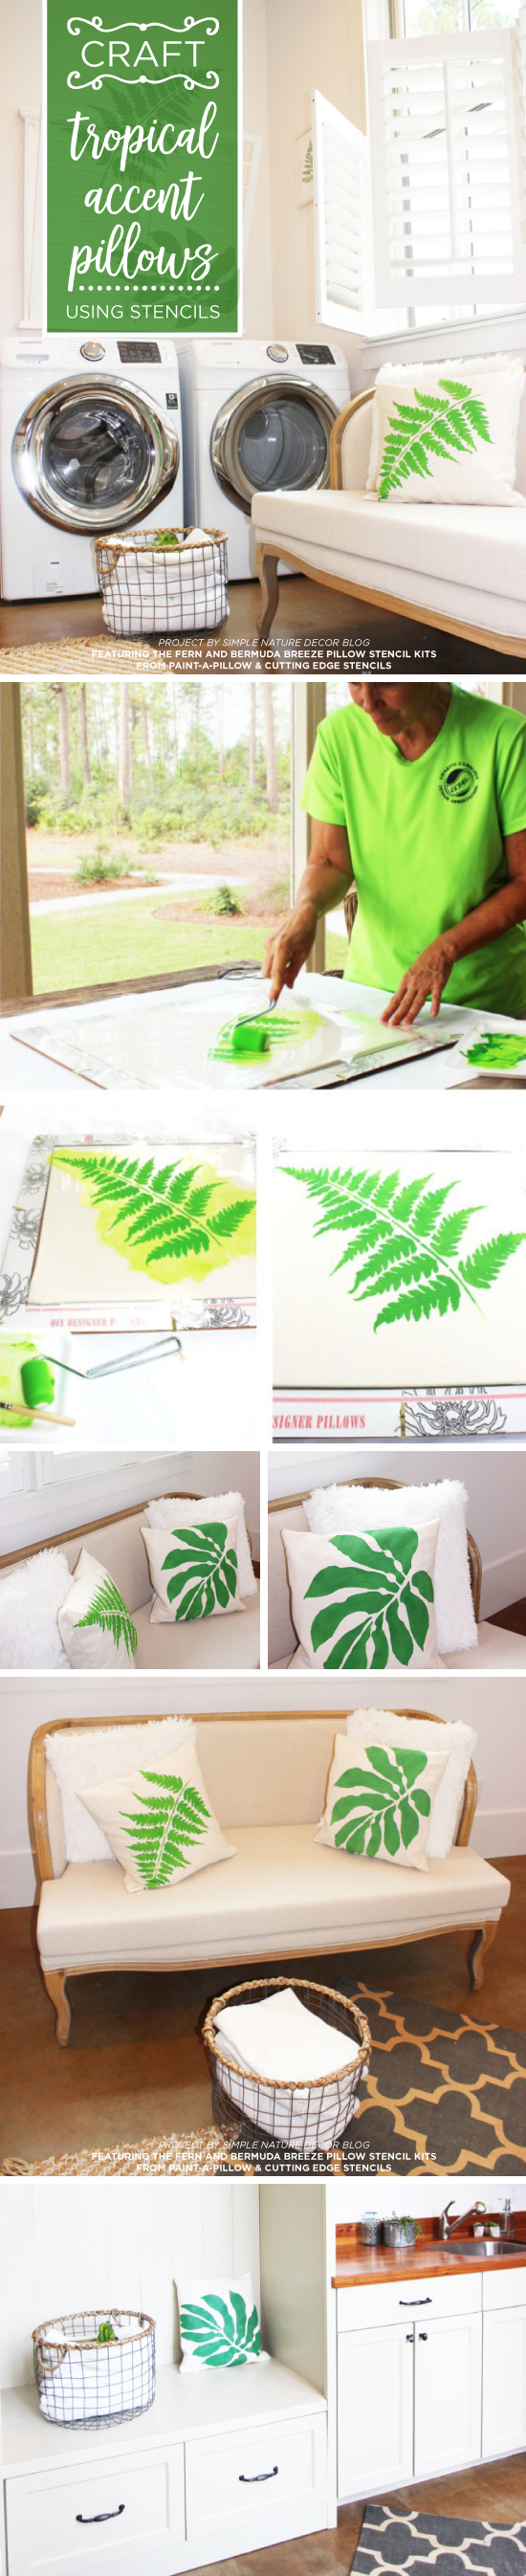 Cutting Edge Stencils shares DIY botanical stenciled accent pillows painted using the Accent Pillow Stencil Kits.  http://www.cuttingedgestencils.com/accent-pillow-stencil-kits.html